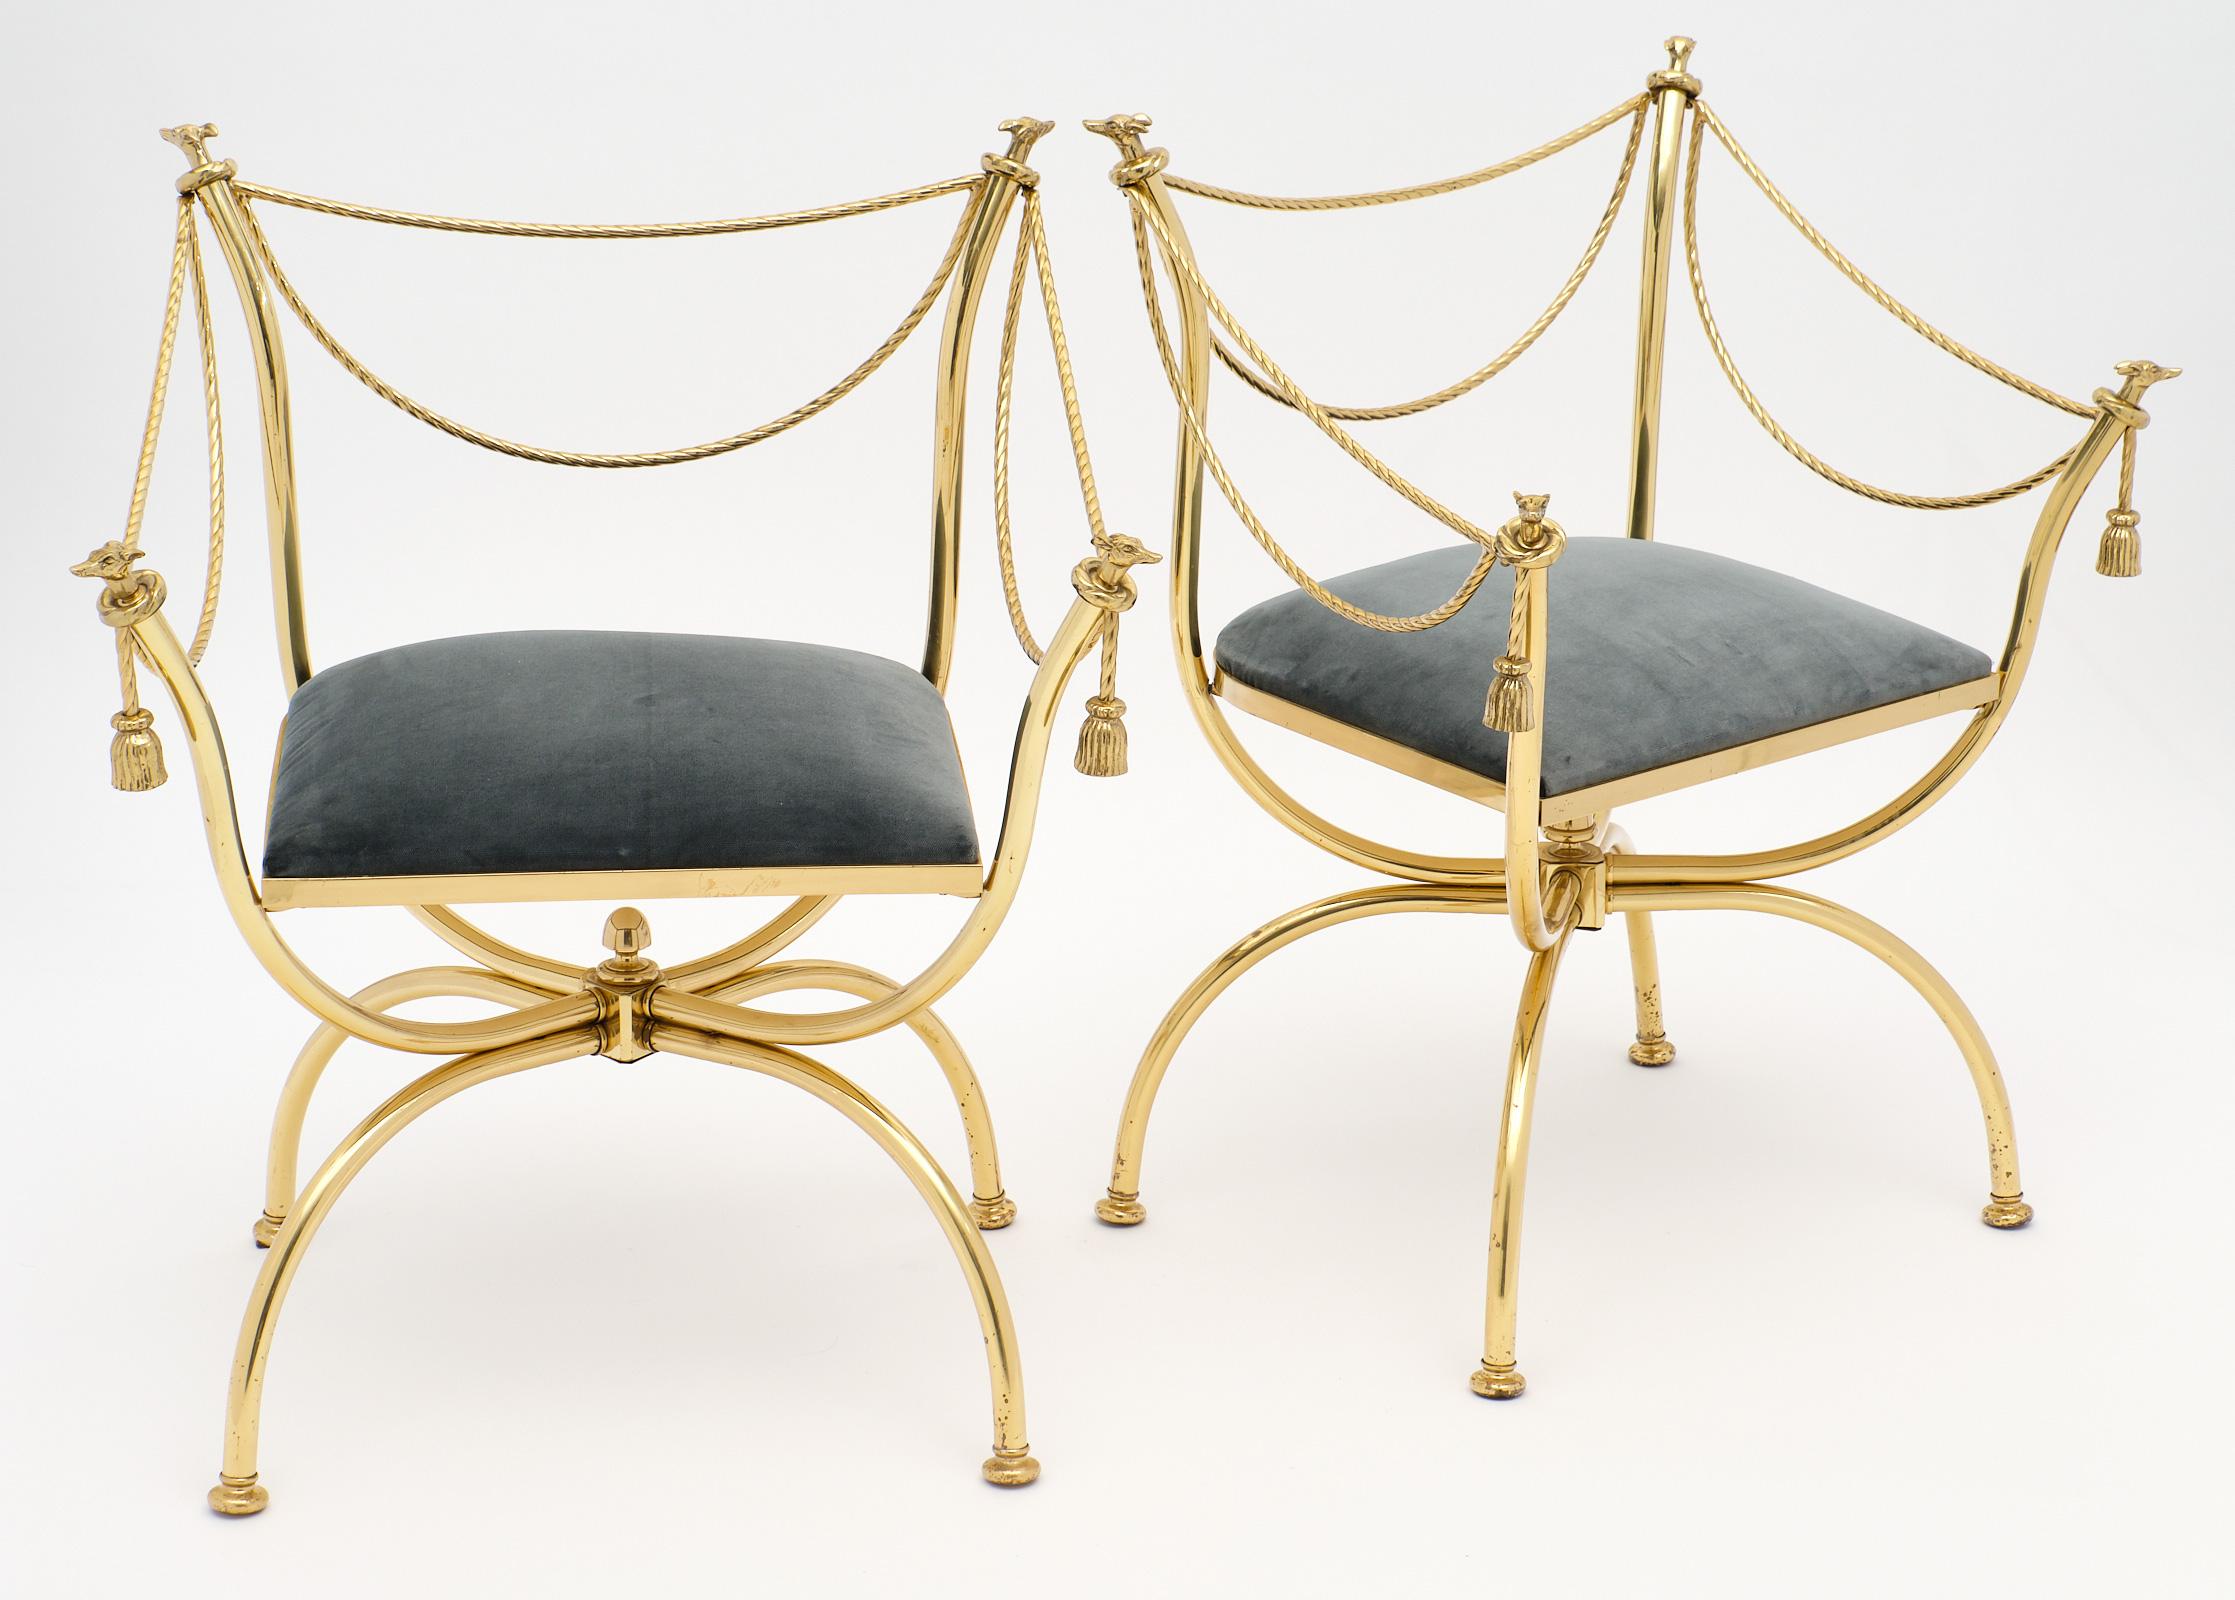 An iconic pair of sold gilt brass armchairs by Maison Charles. The finest cast quality is displayed in the greyhound finials, ropes, and tassels. They have been newly professionally upholstered in a dark gray velvet.